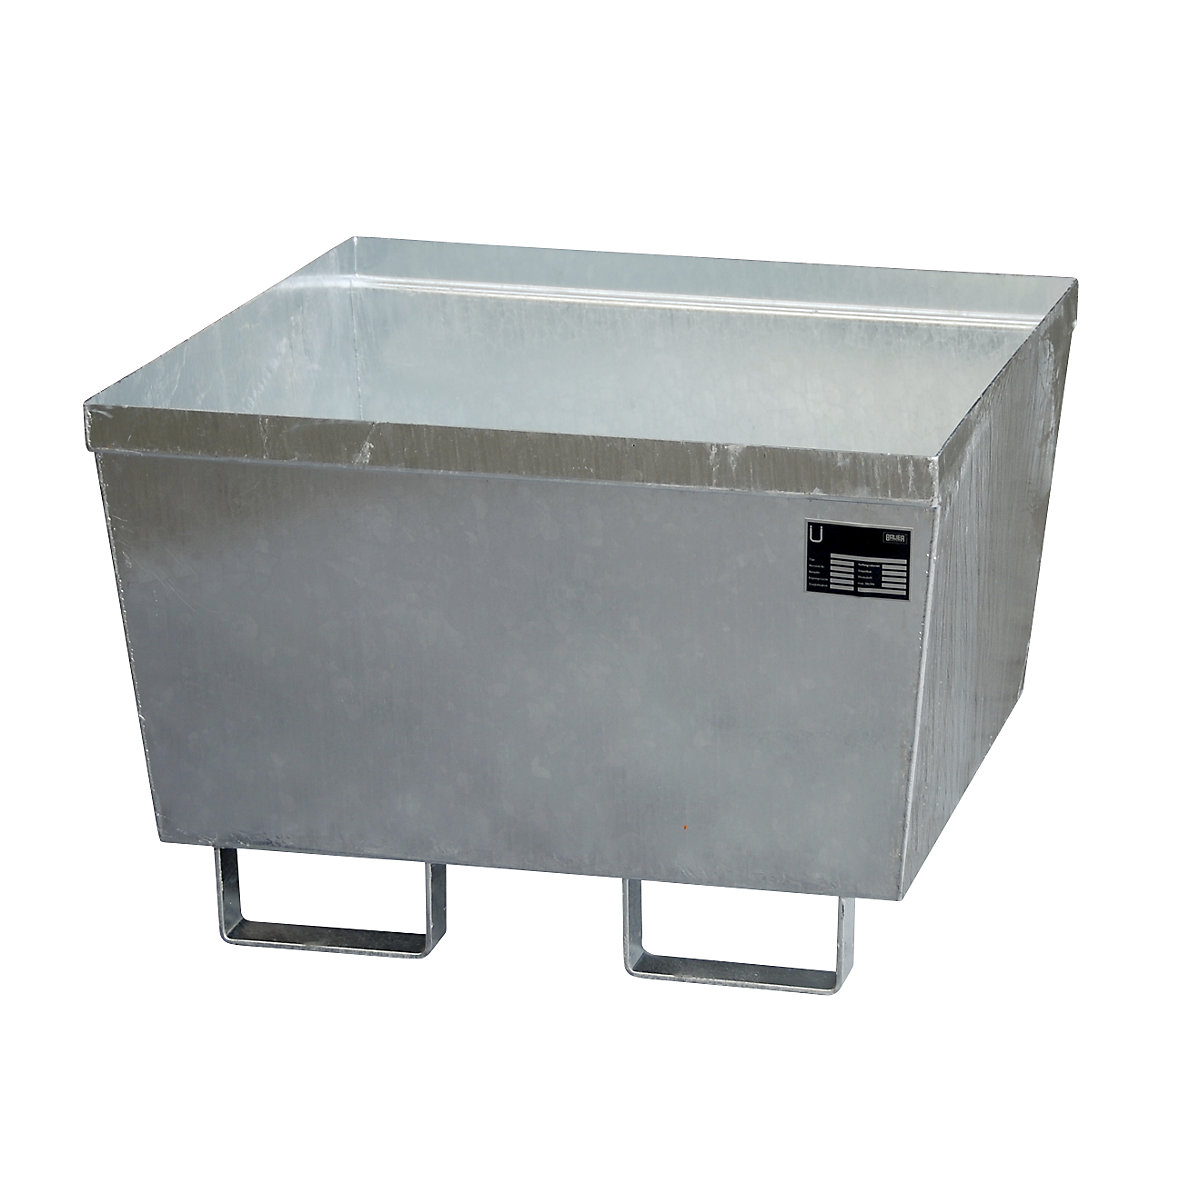 Steel sump tray with edge profiles – eurokraft pro, LxWxH 800 x 800 x 545 mm, without grate, hot dip galvanised-5